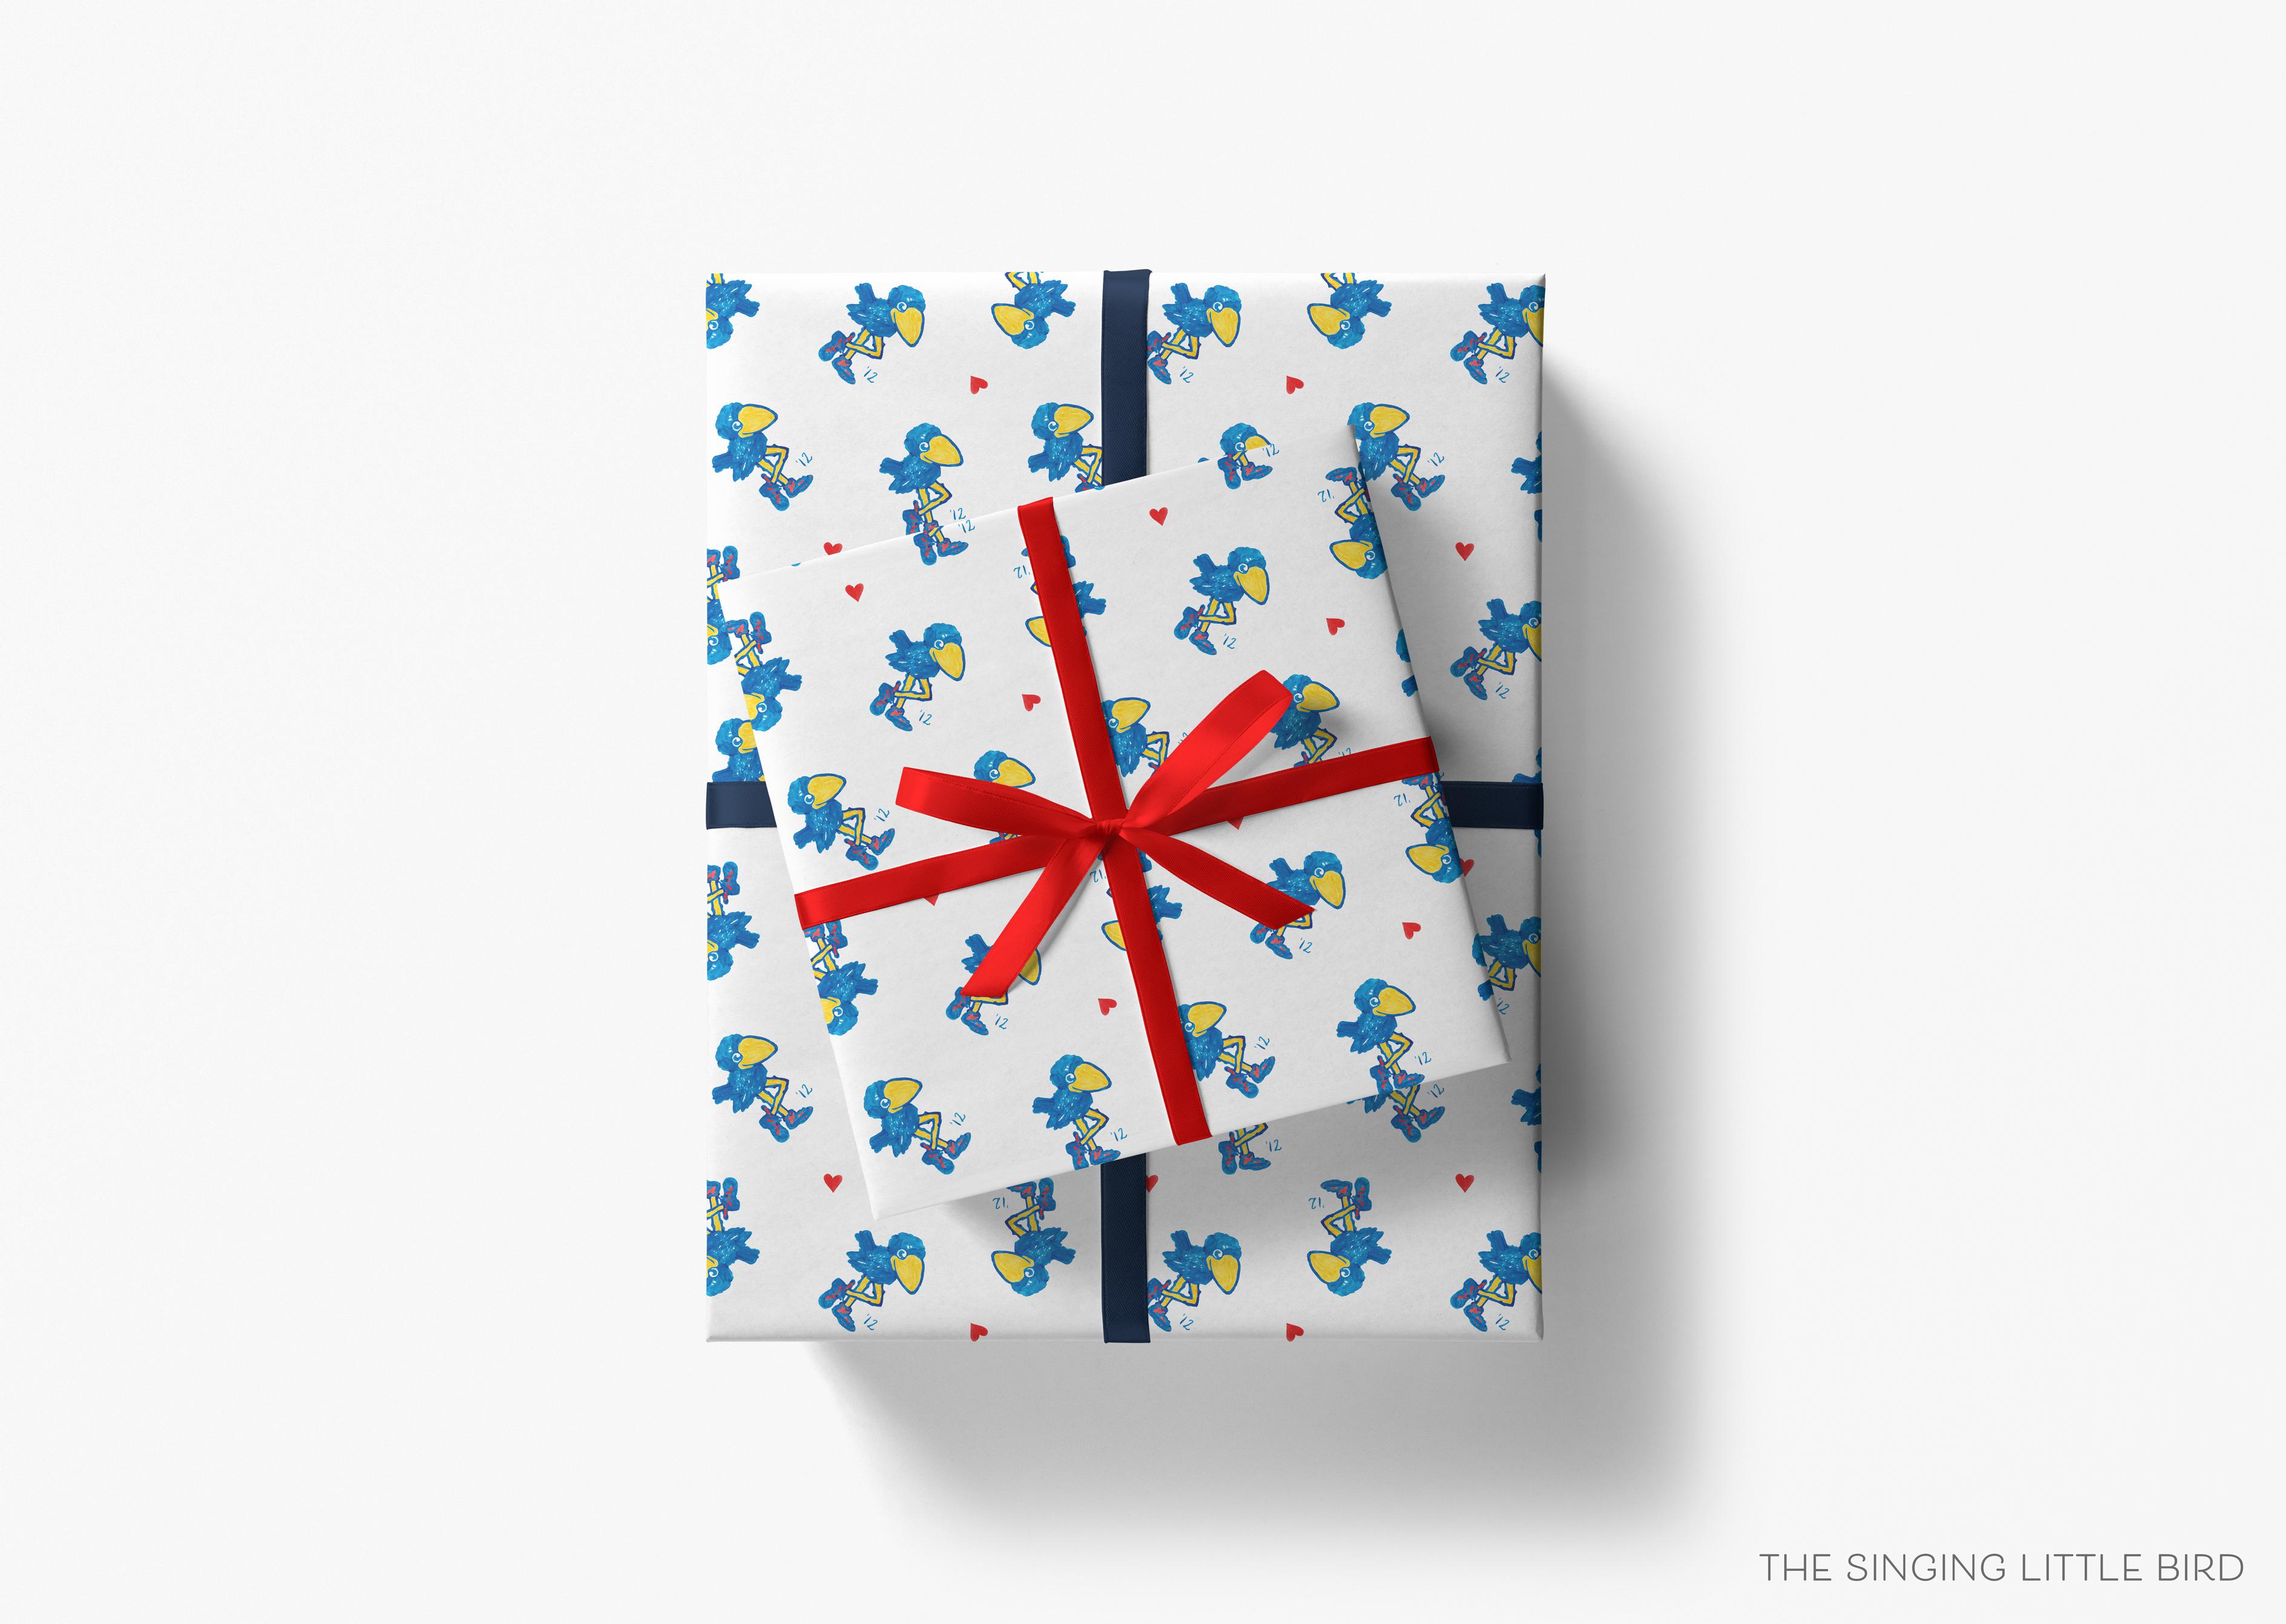 1912 Jayhawk Mini Hearts Gift Wrap - Officially Licensed-This matte finish gift wrap features our hand-painted watercolor Kansas 1912 Jayhawks and hearts. It makes a perfect wrapping paper for any celebration present for a University of Kanas lover. -The Singing Little Bird